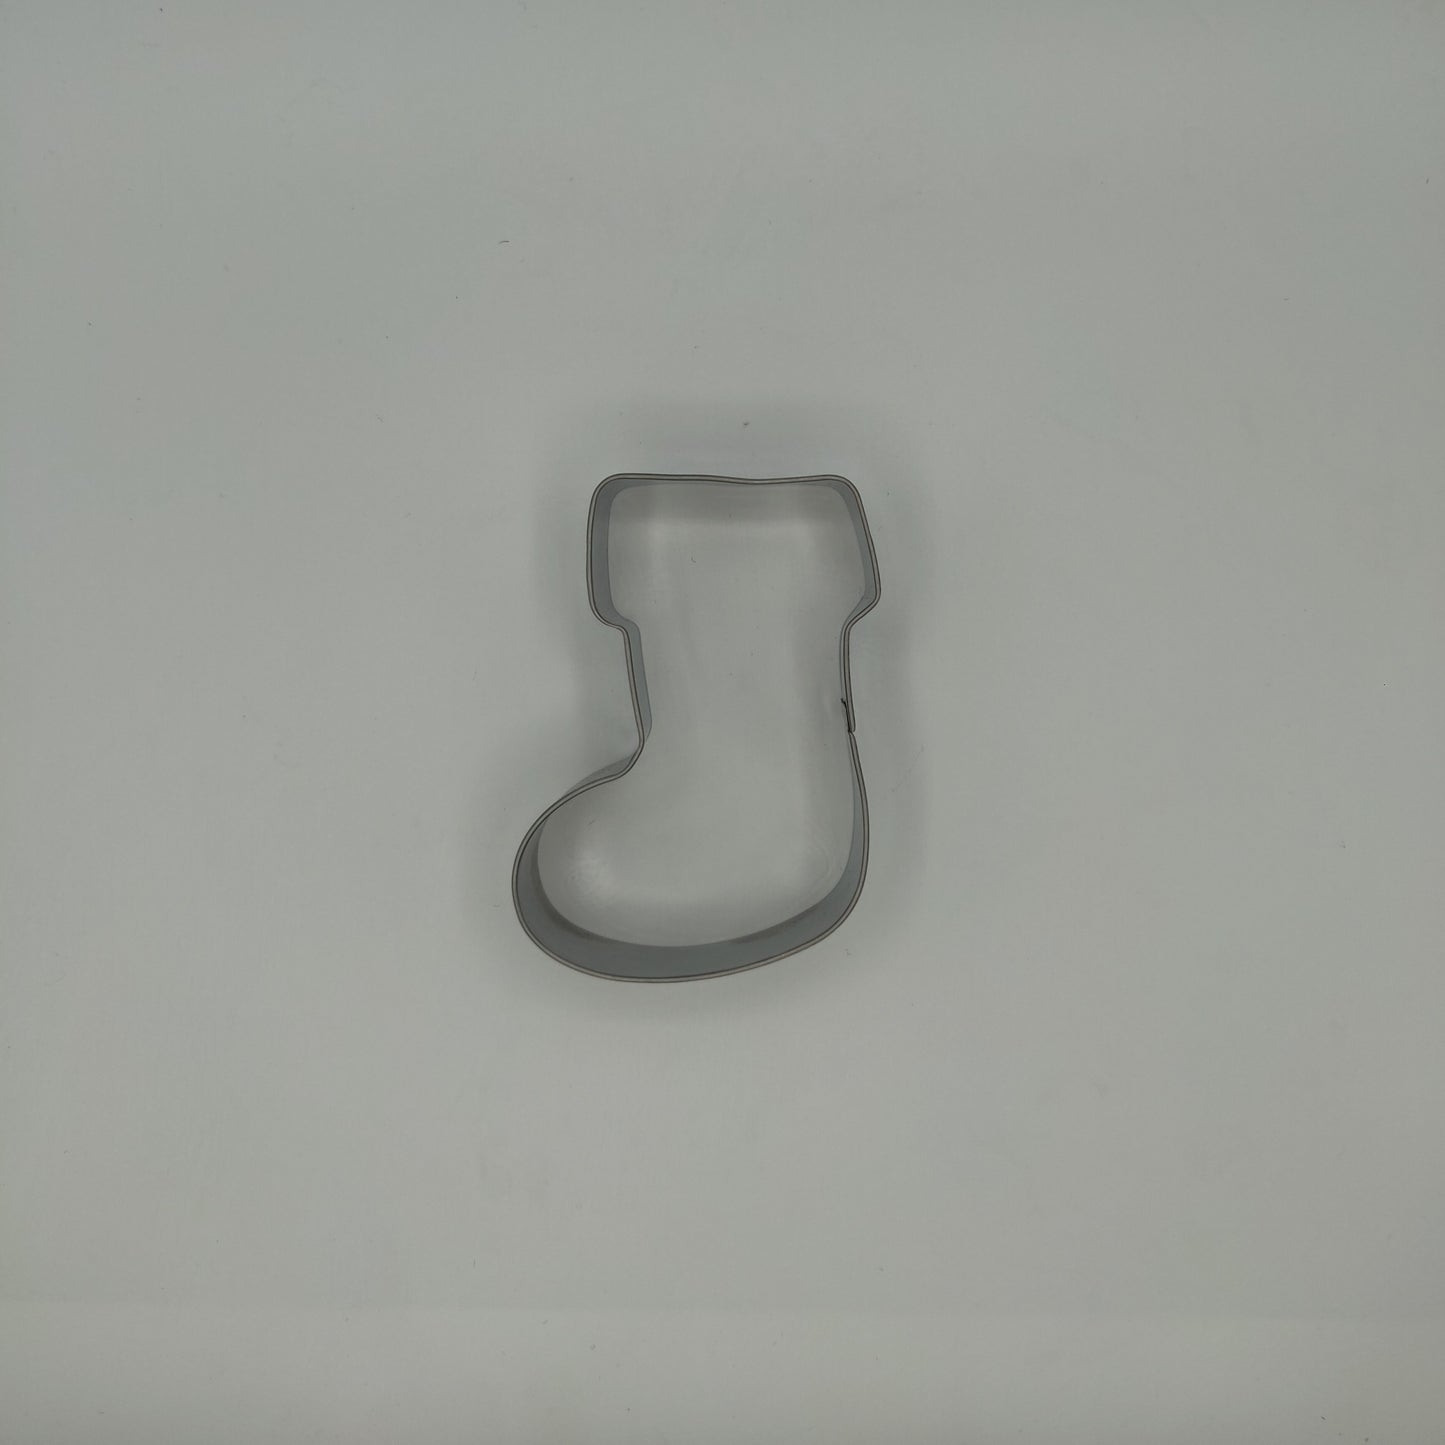 Plump Stocking Cookie Cutter (3 1/2")